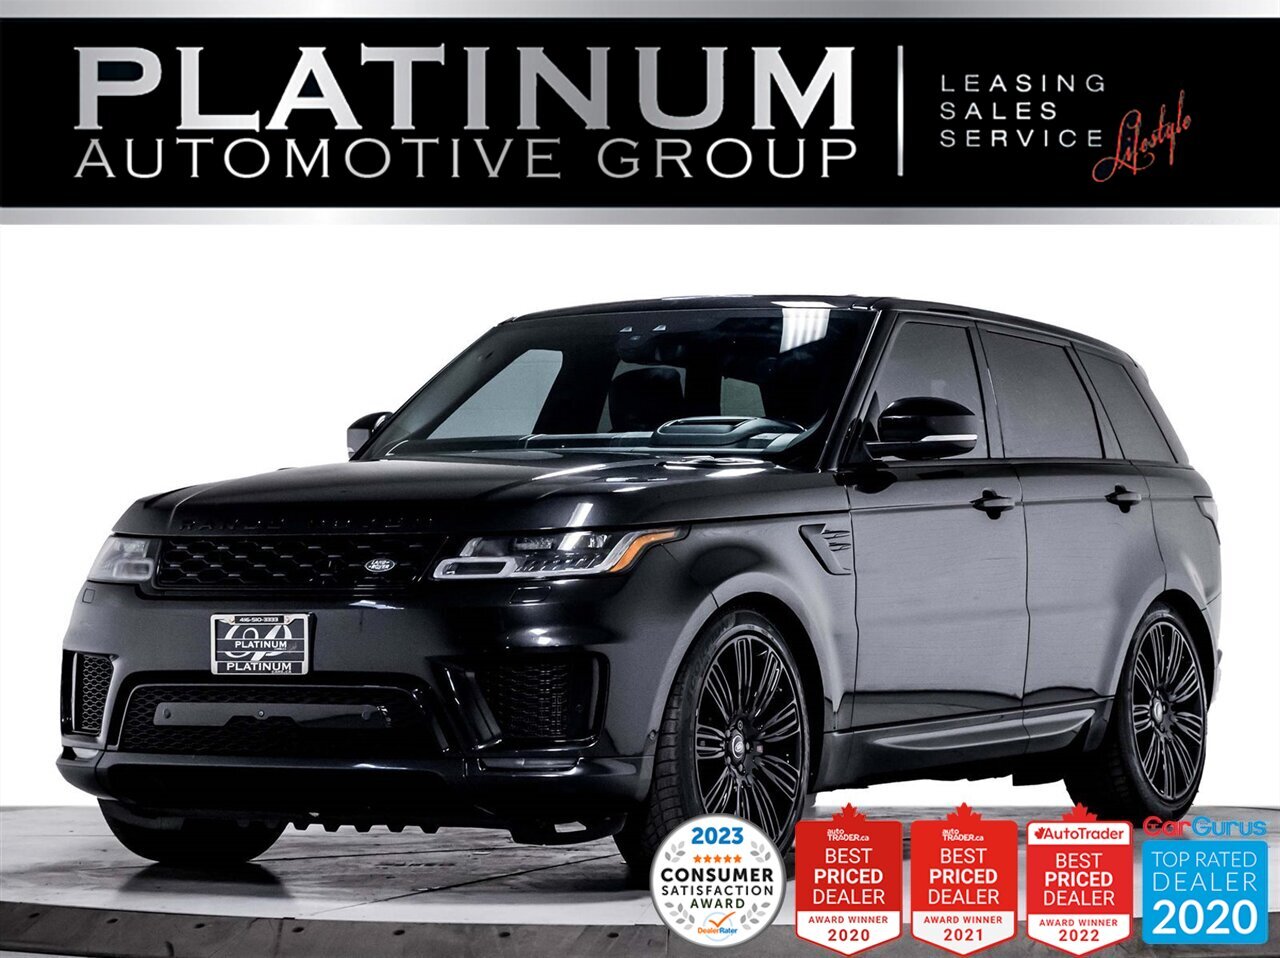 2018 Land Rover Range Rover Sport SUPERCHARGED DYNAMIC, 518HP V8, PANO, MERIDIAN